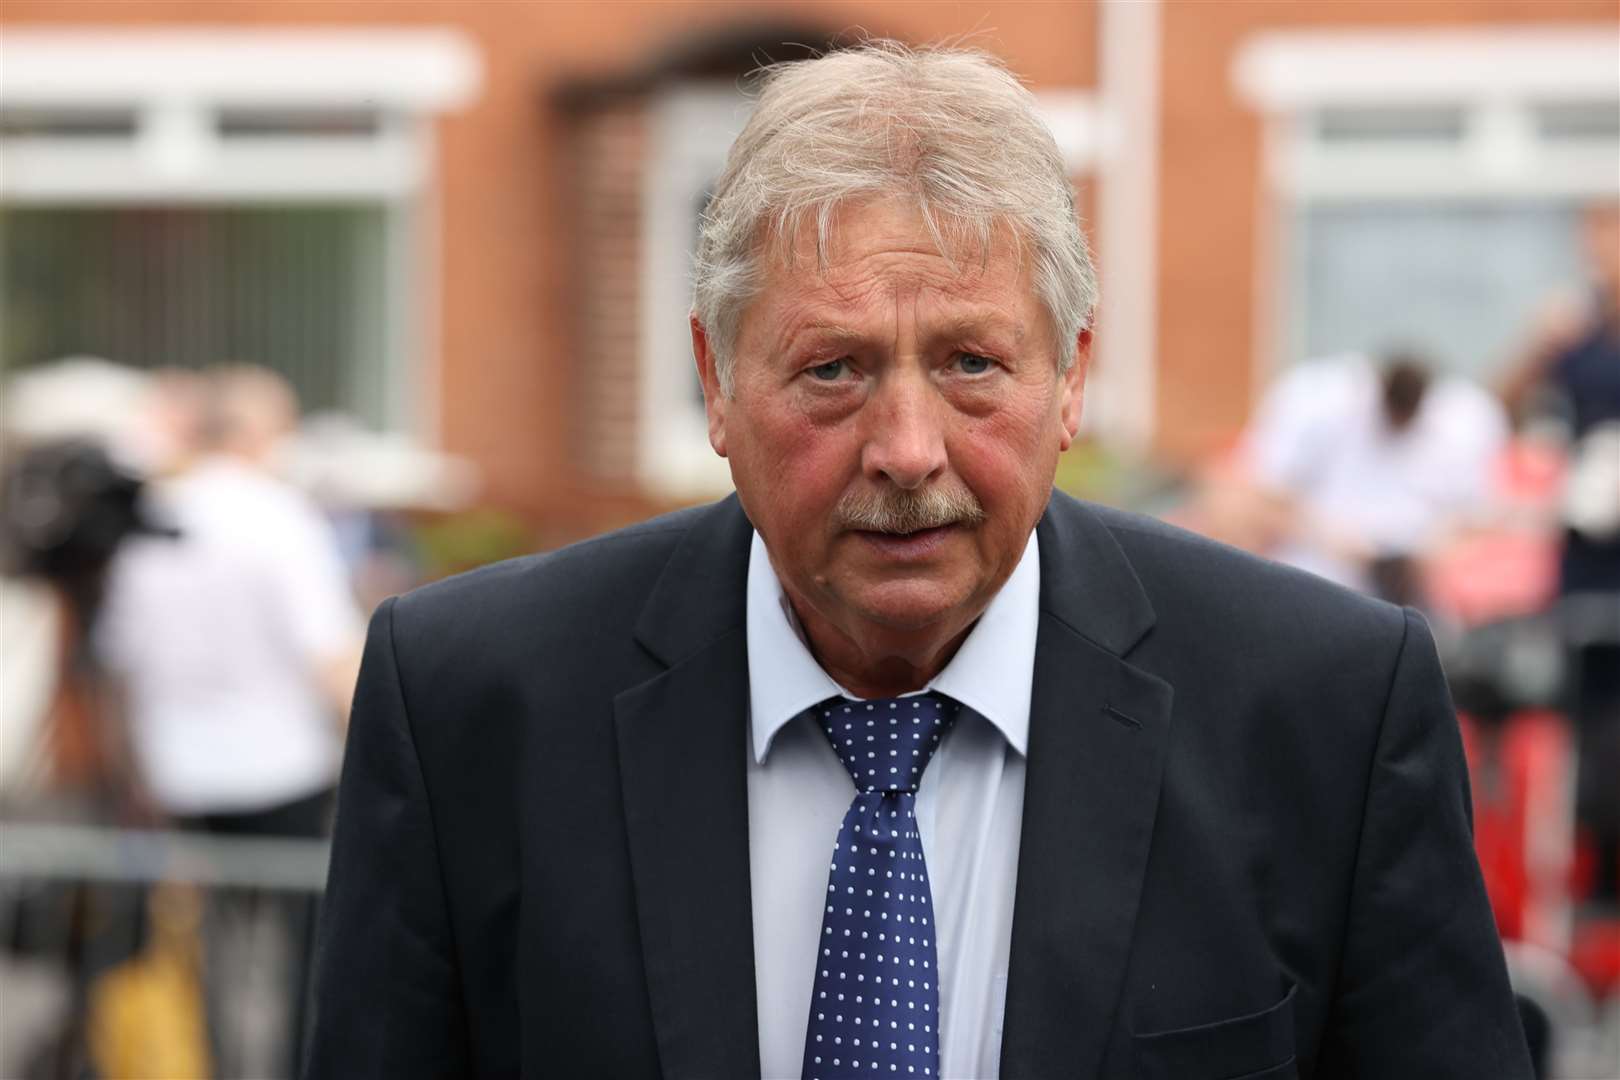 DUP MP Sammy Wilson signalled there was still strength of feeling on the DUP benches about post-Brexit trade arrangements (Liam McBurney/PA Images)